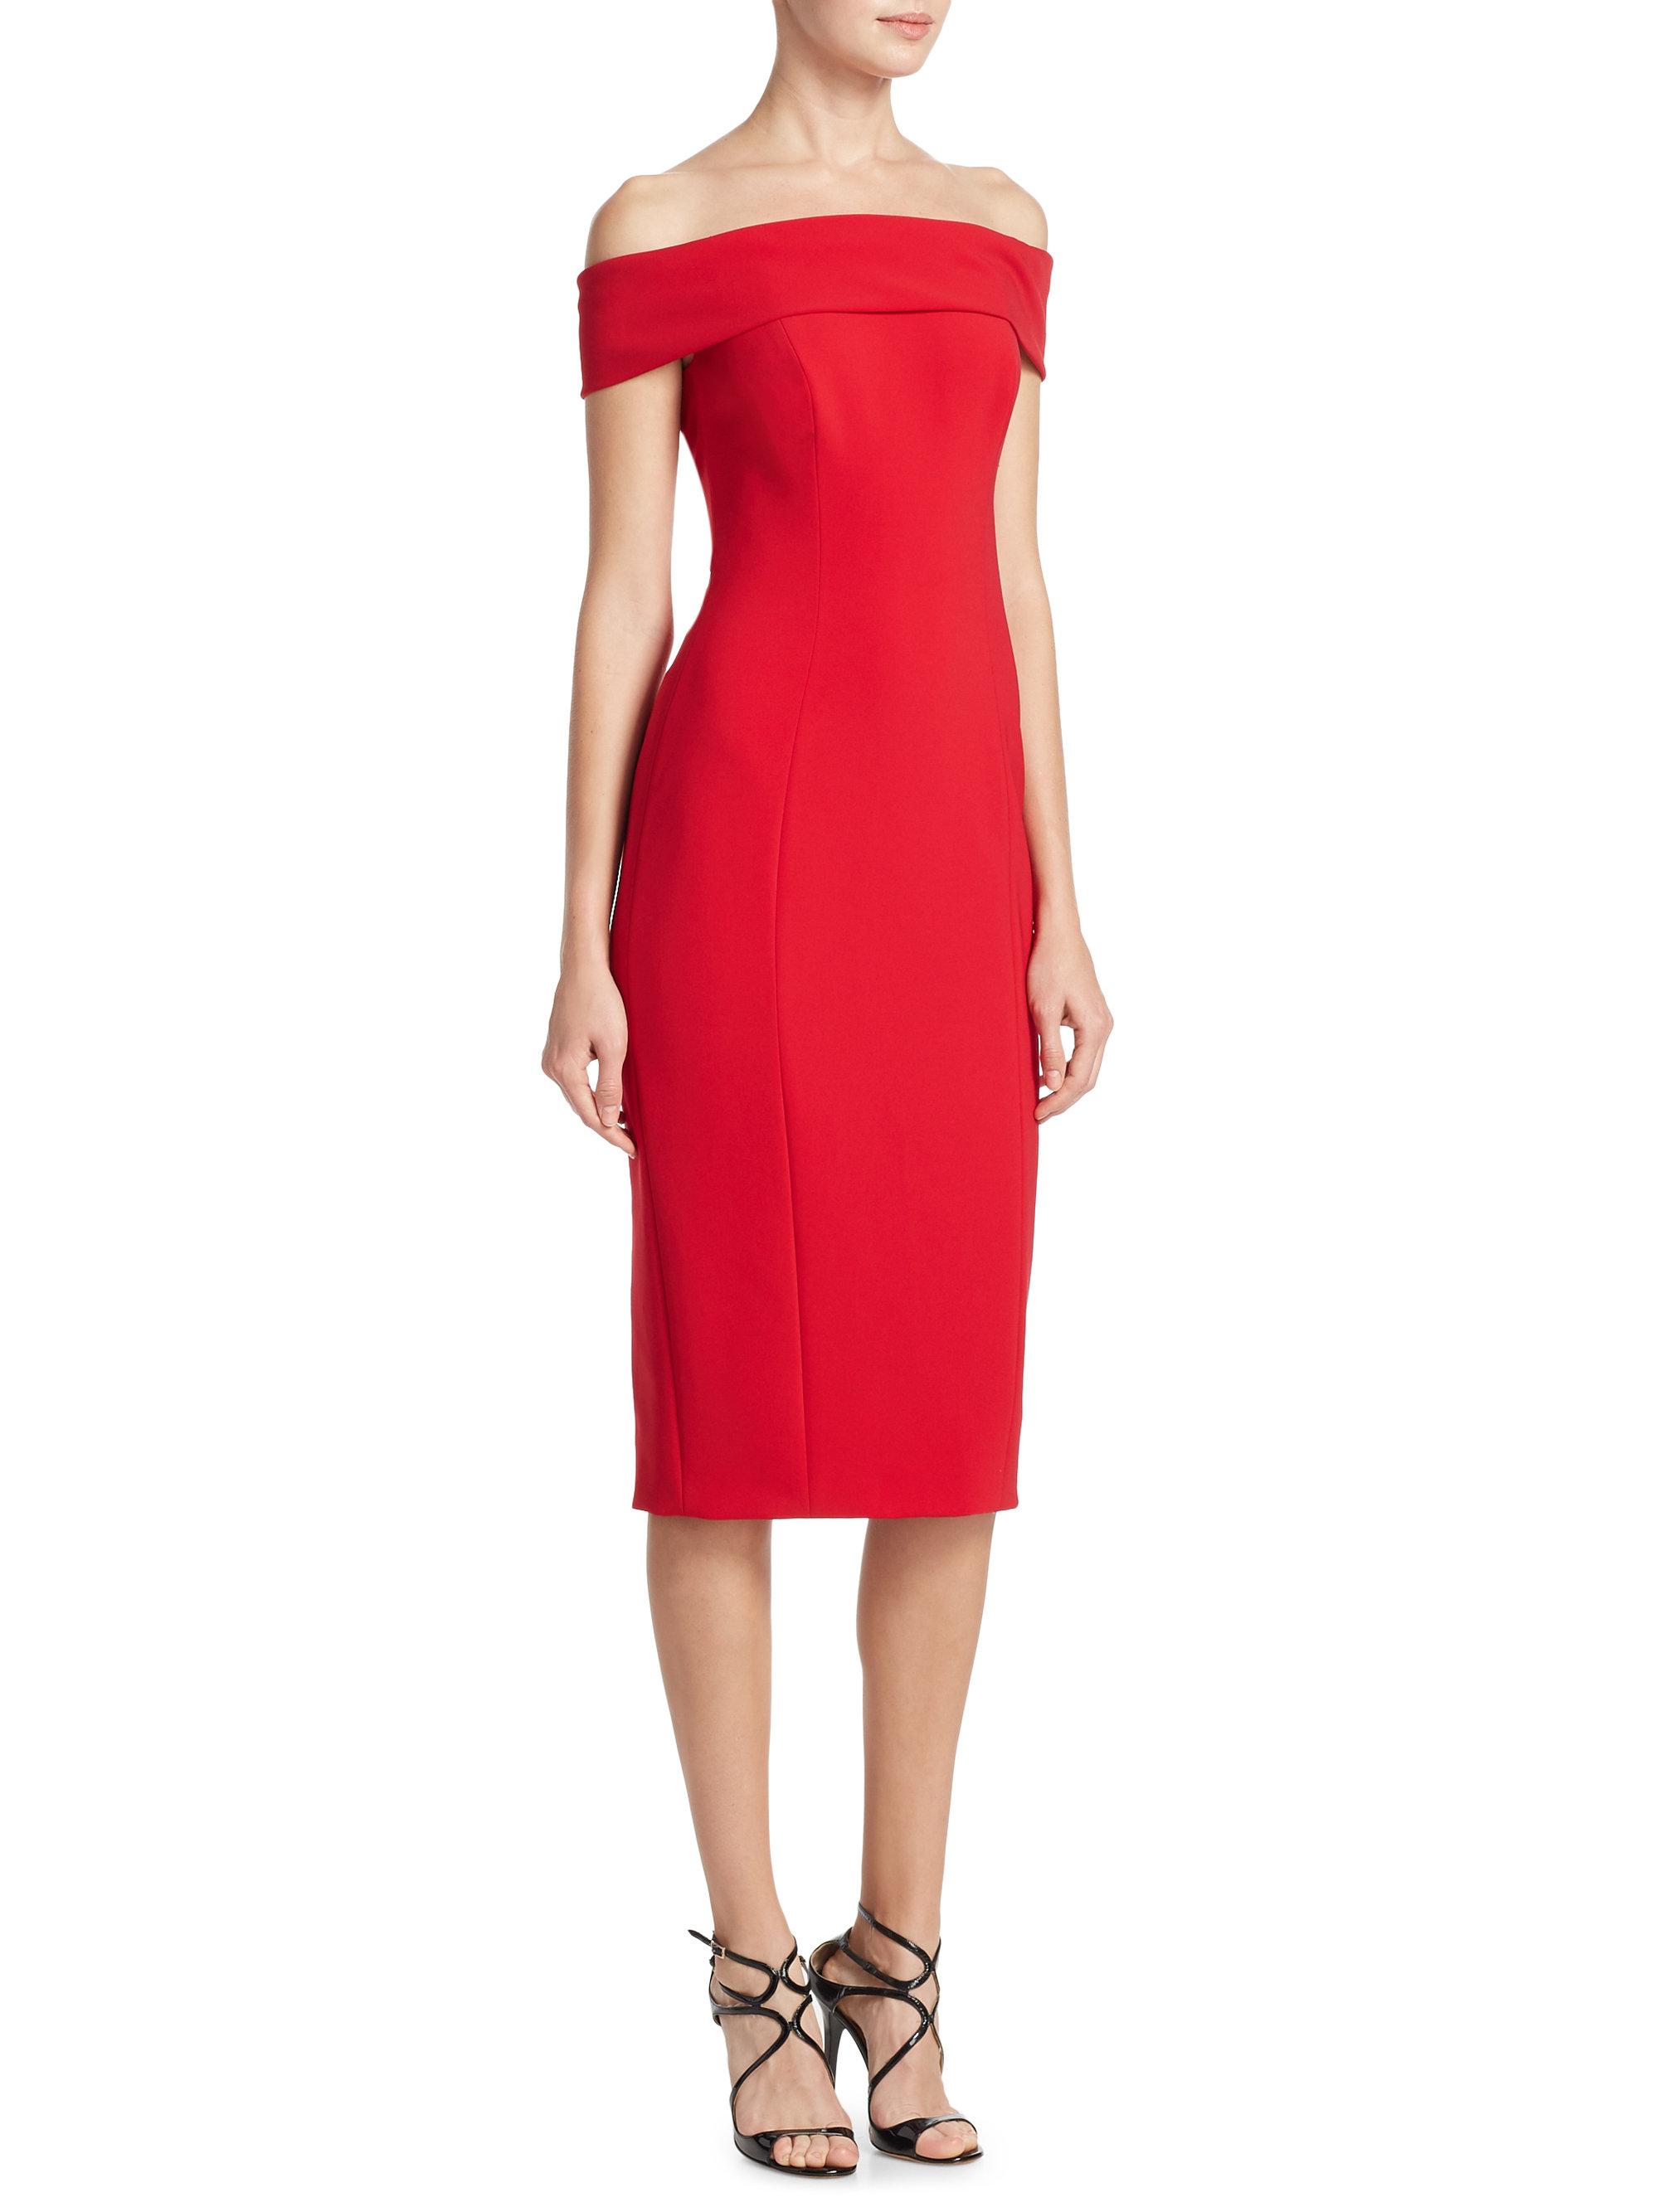 THEIA Synthetic Off-the-shoulder Cocktail Dress in Cherry (Red) - Lyst